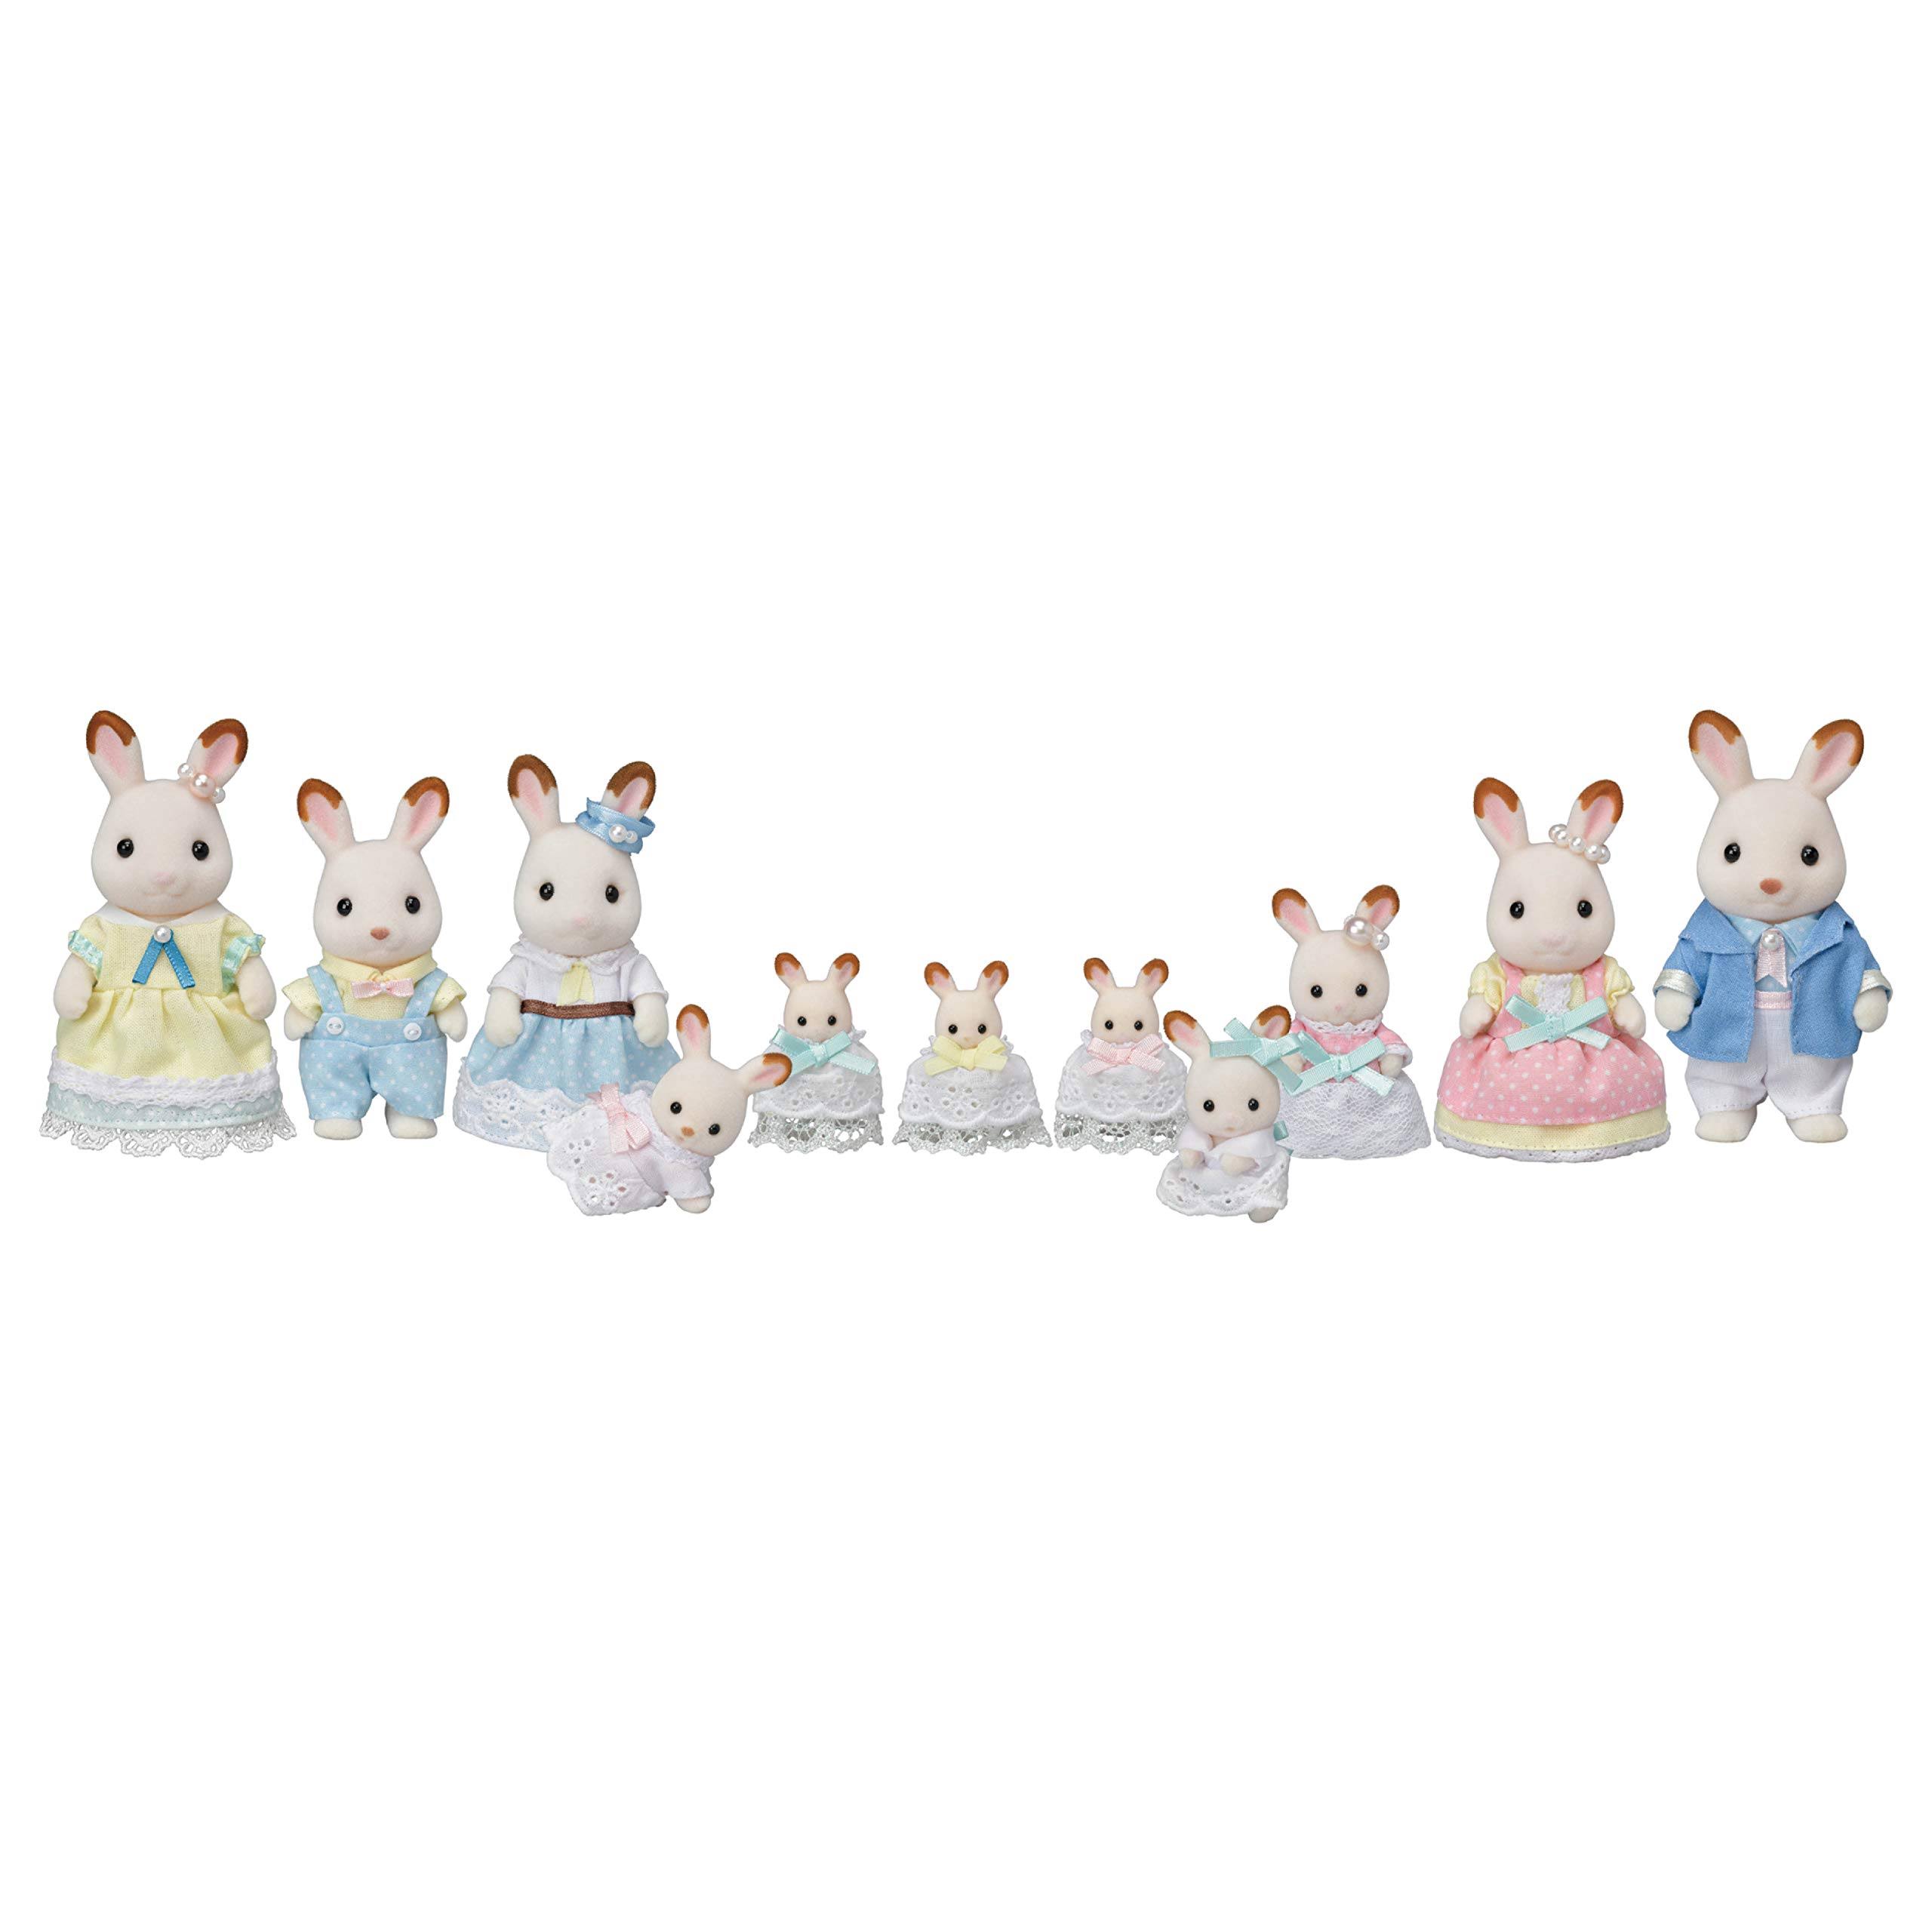 Calico Critters Hopscotch Rabbit Family Celebration Set Dolls, 35th Anniversary, Limited Edition